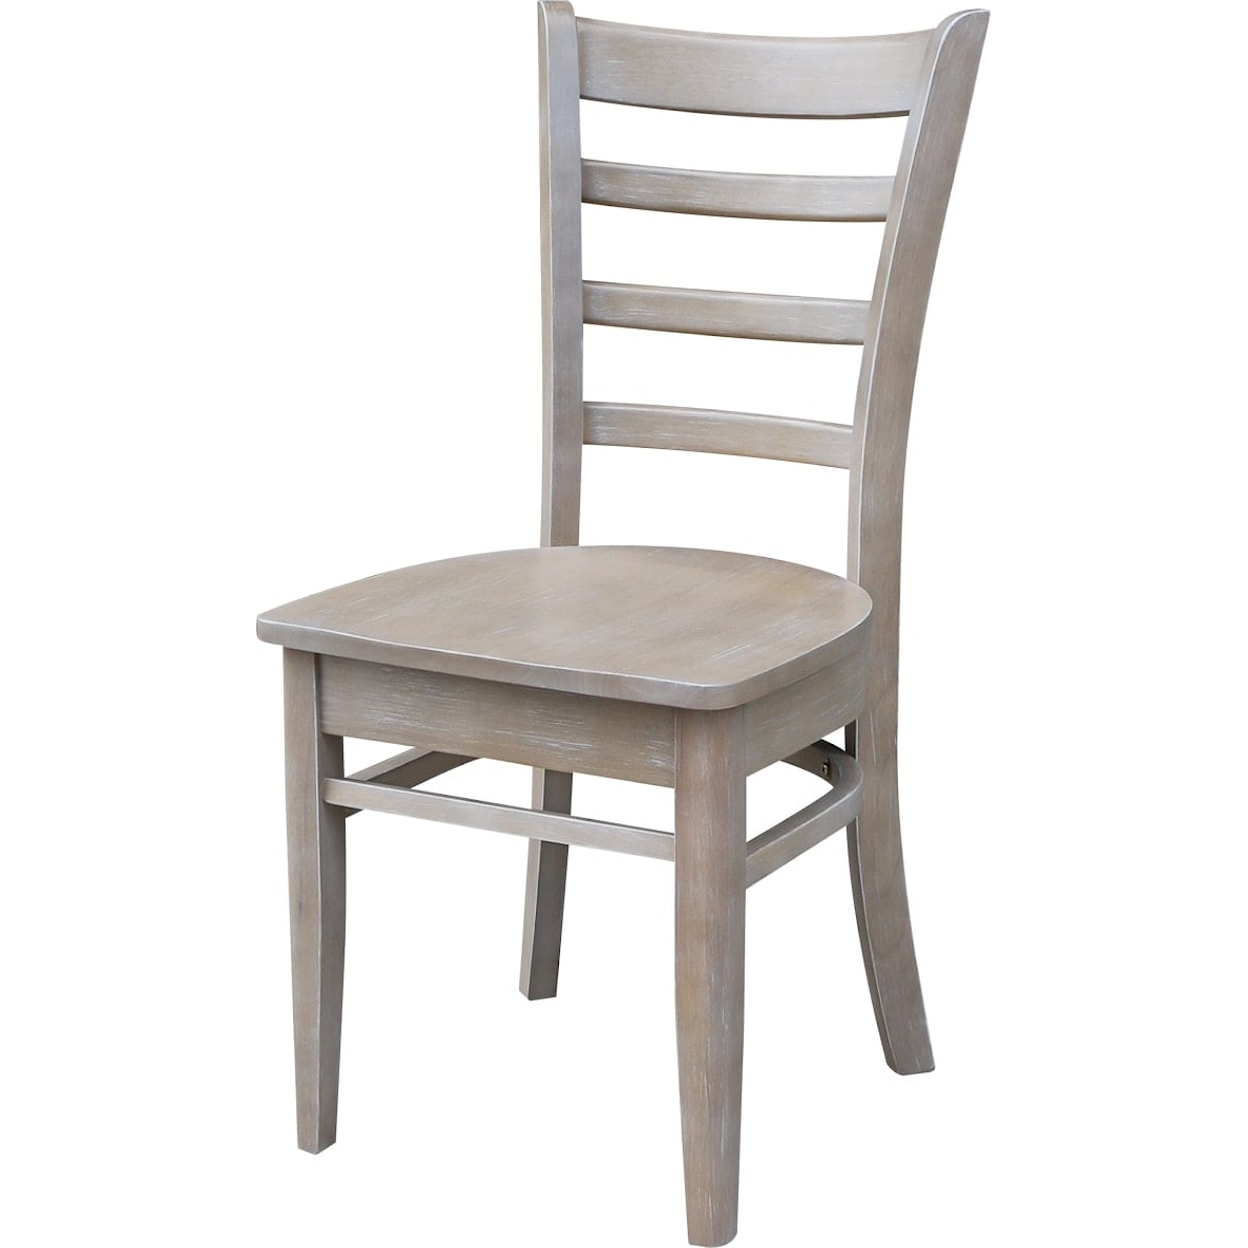 John Thomas Dining Essentials Emily Chair in Taupe Gray